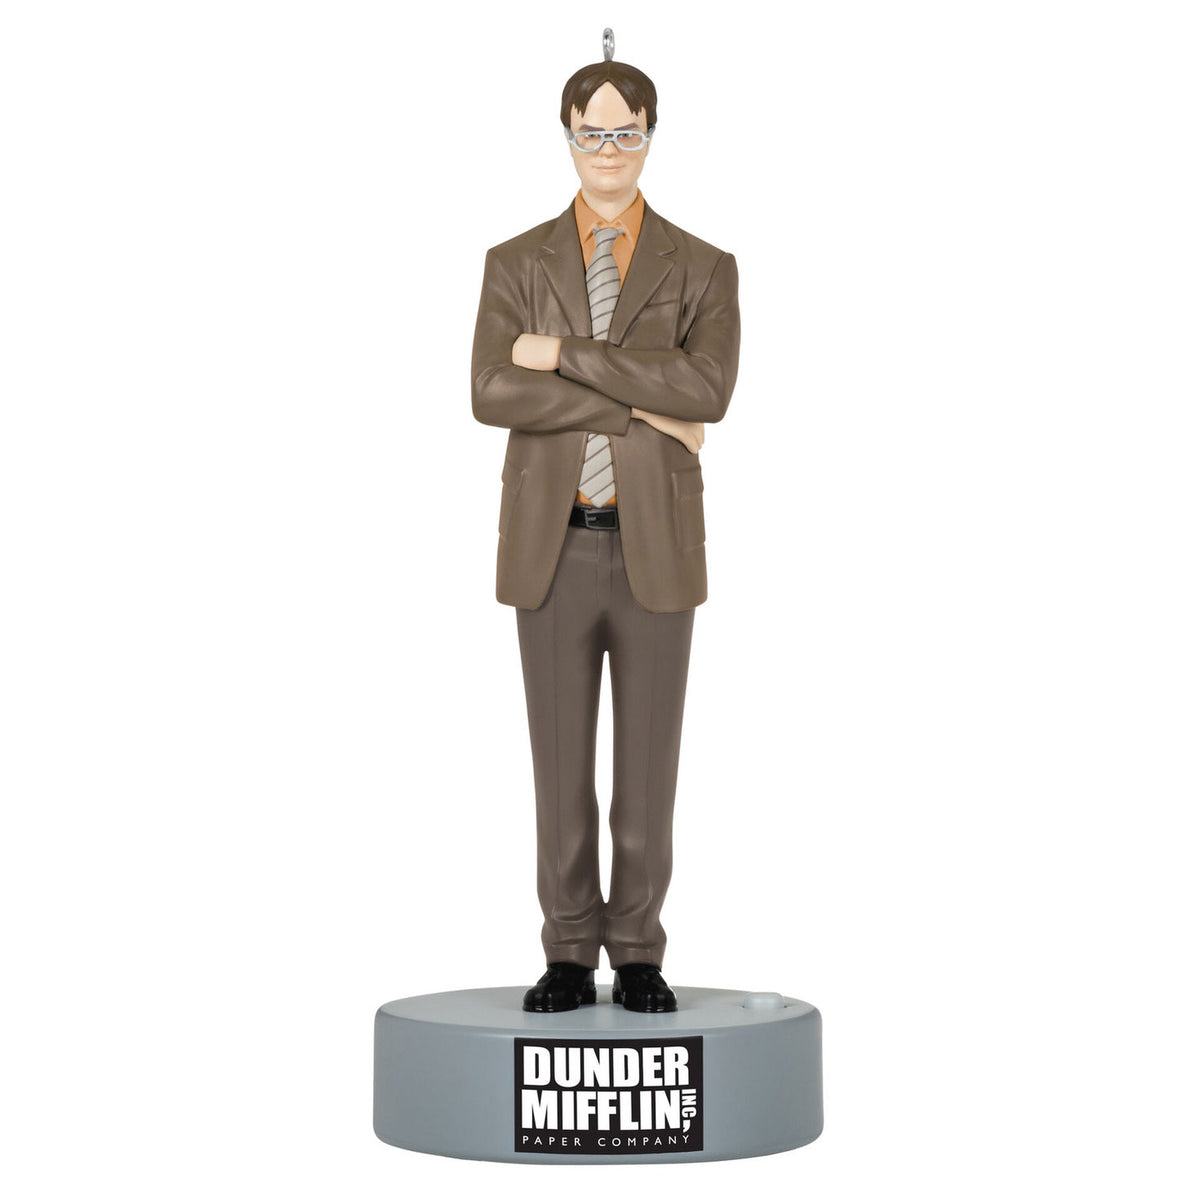 The Office Pen the Office LED Pens Dwight Schrute the Office Gifts Dunder  Mifflin Paper Michael Scott Gifts Gag Gifts, LED Pen -  Finland